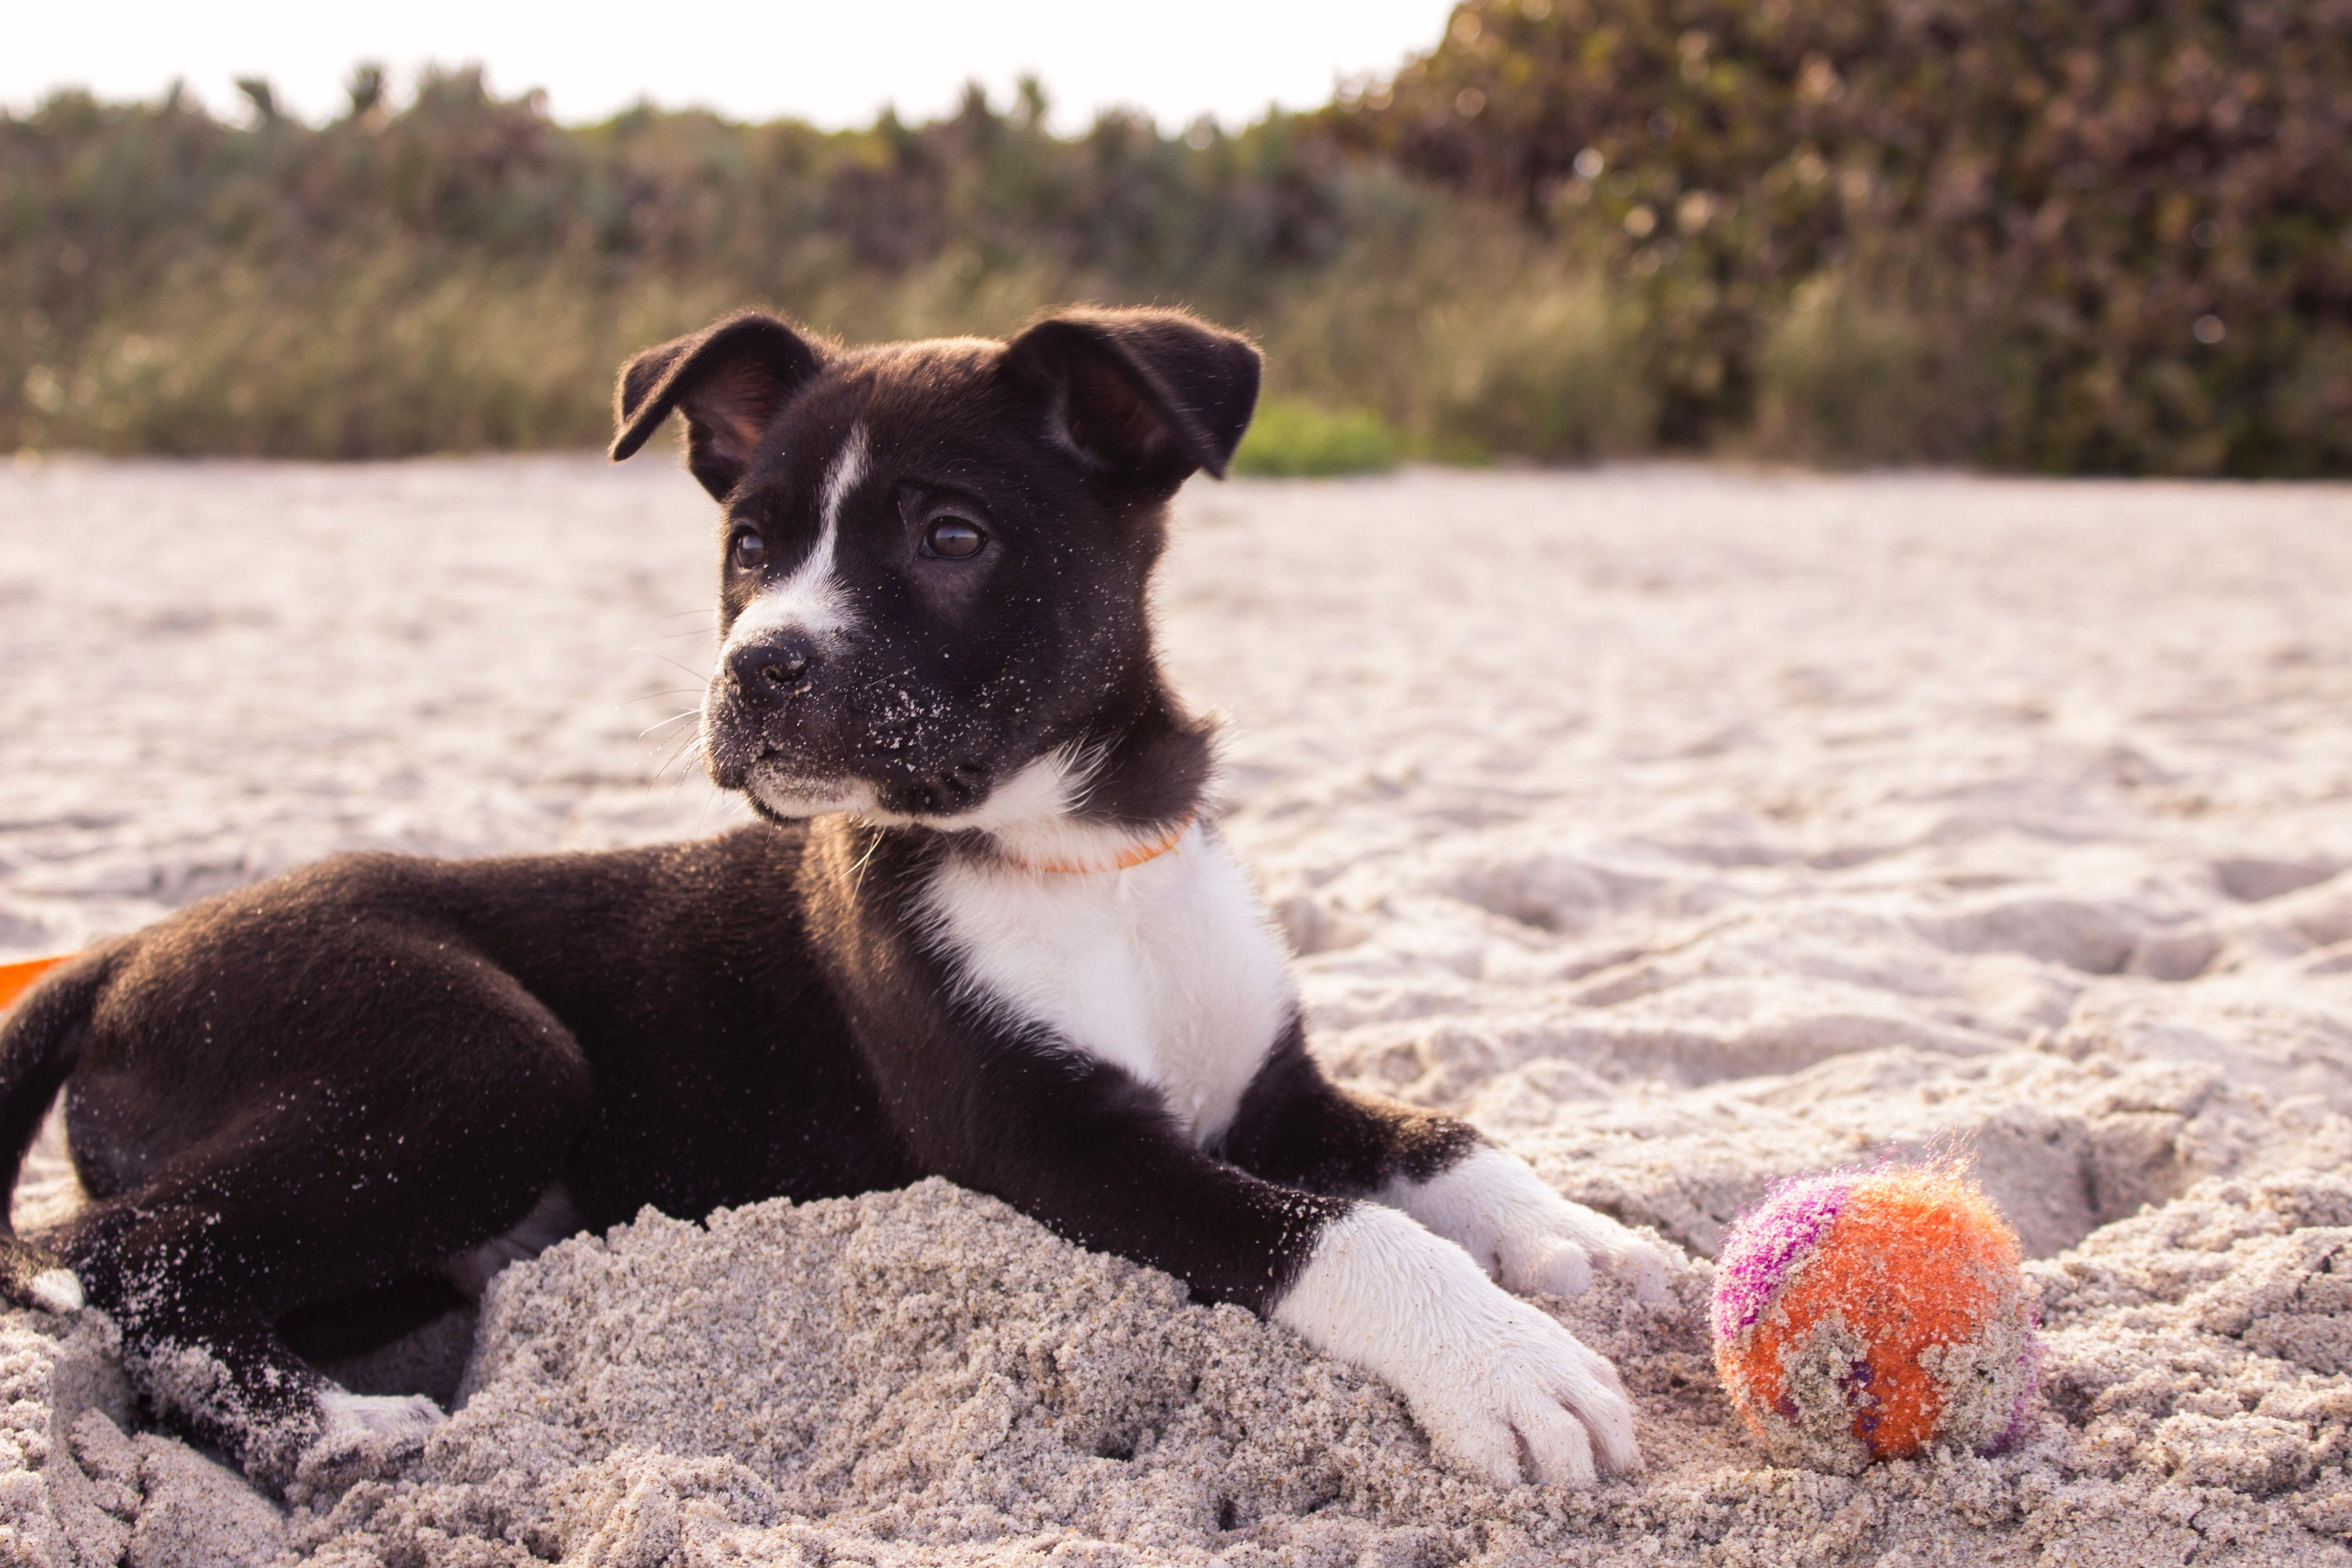 Puppy playing with a tennis ball on a dog friendly beach. 